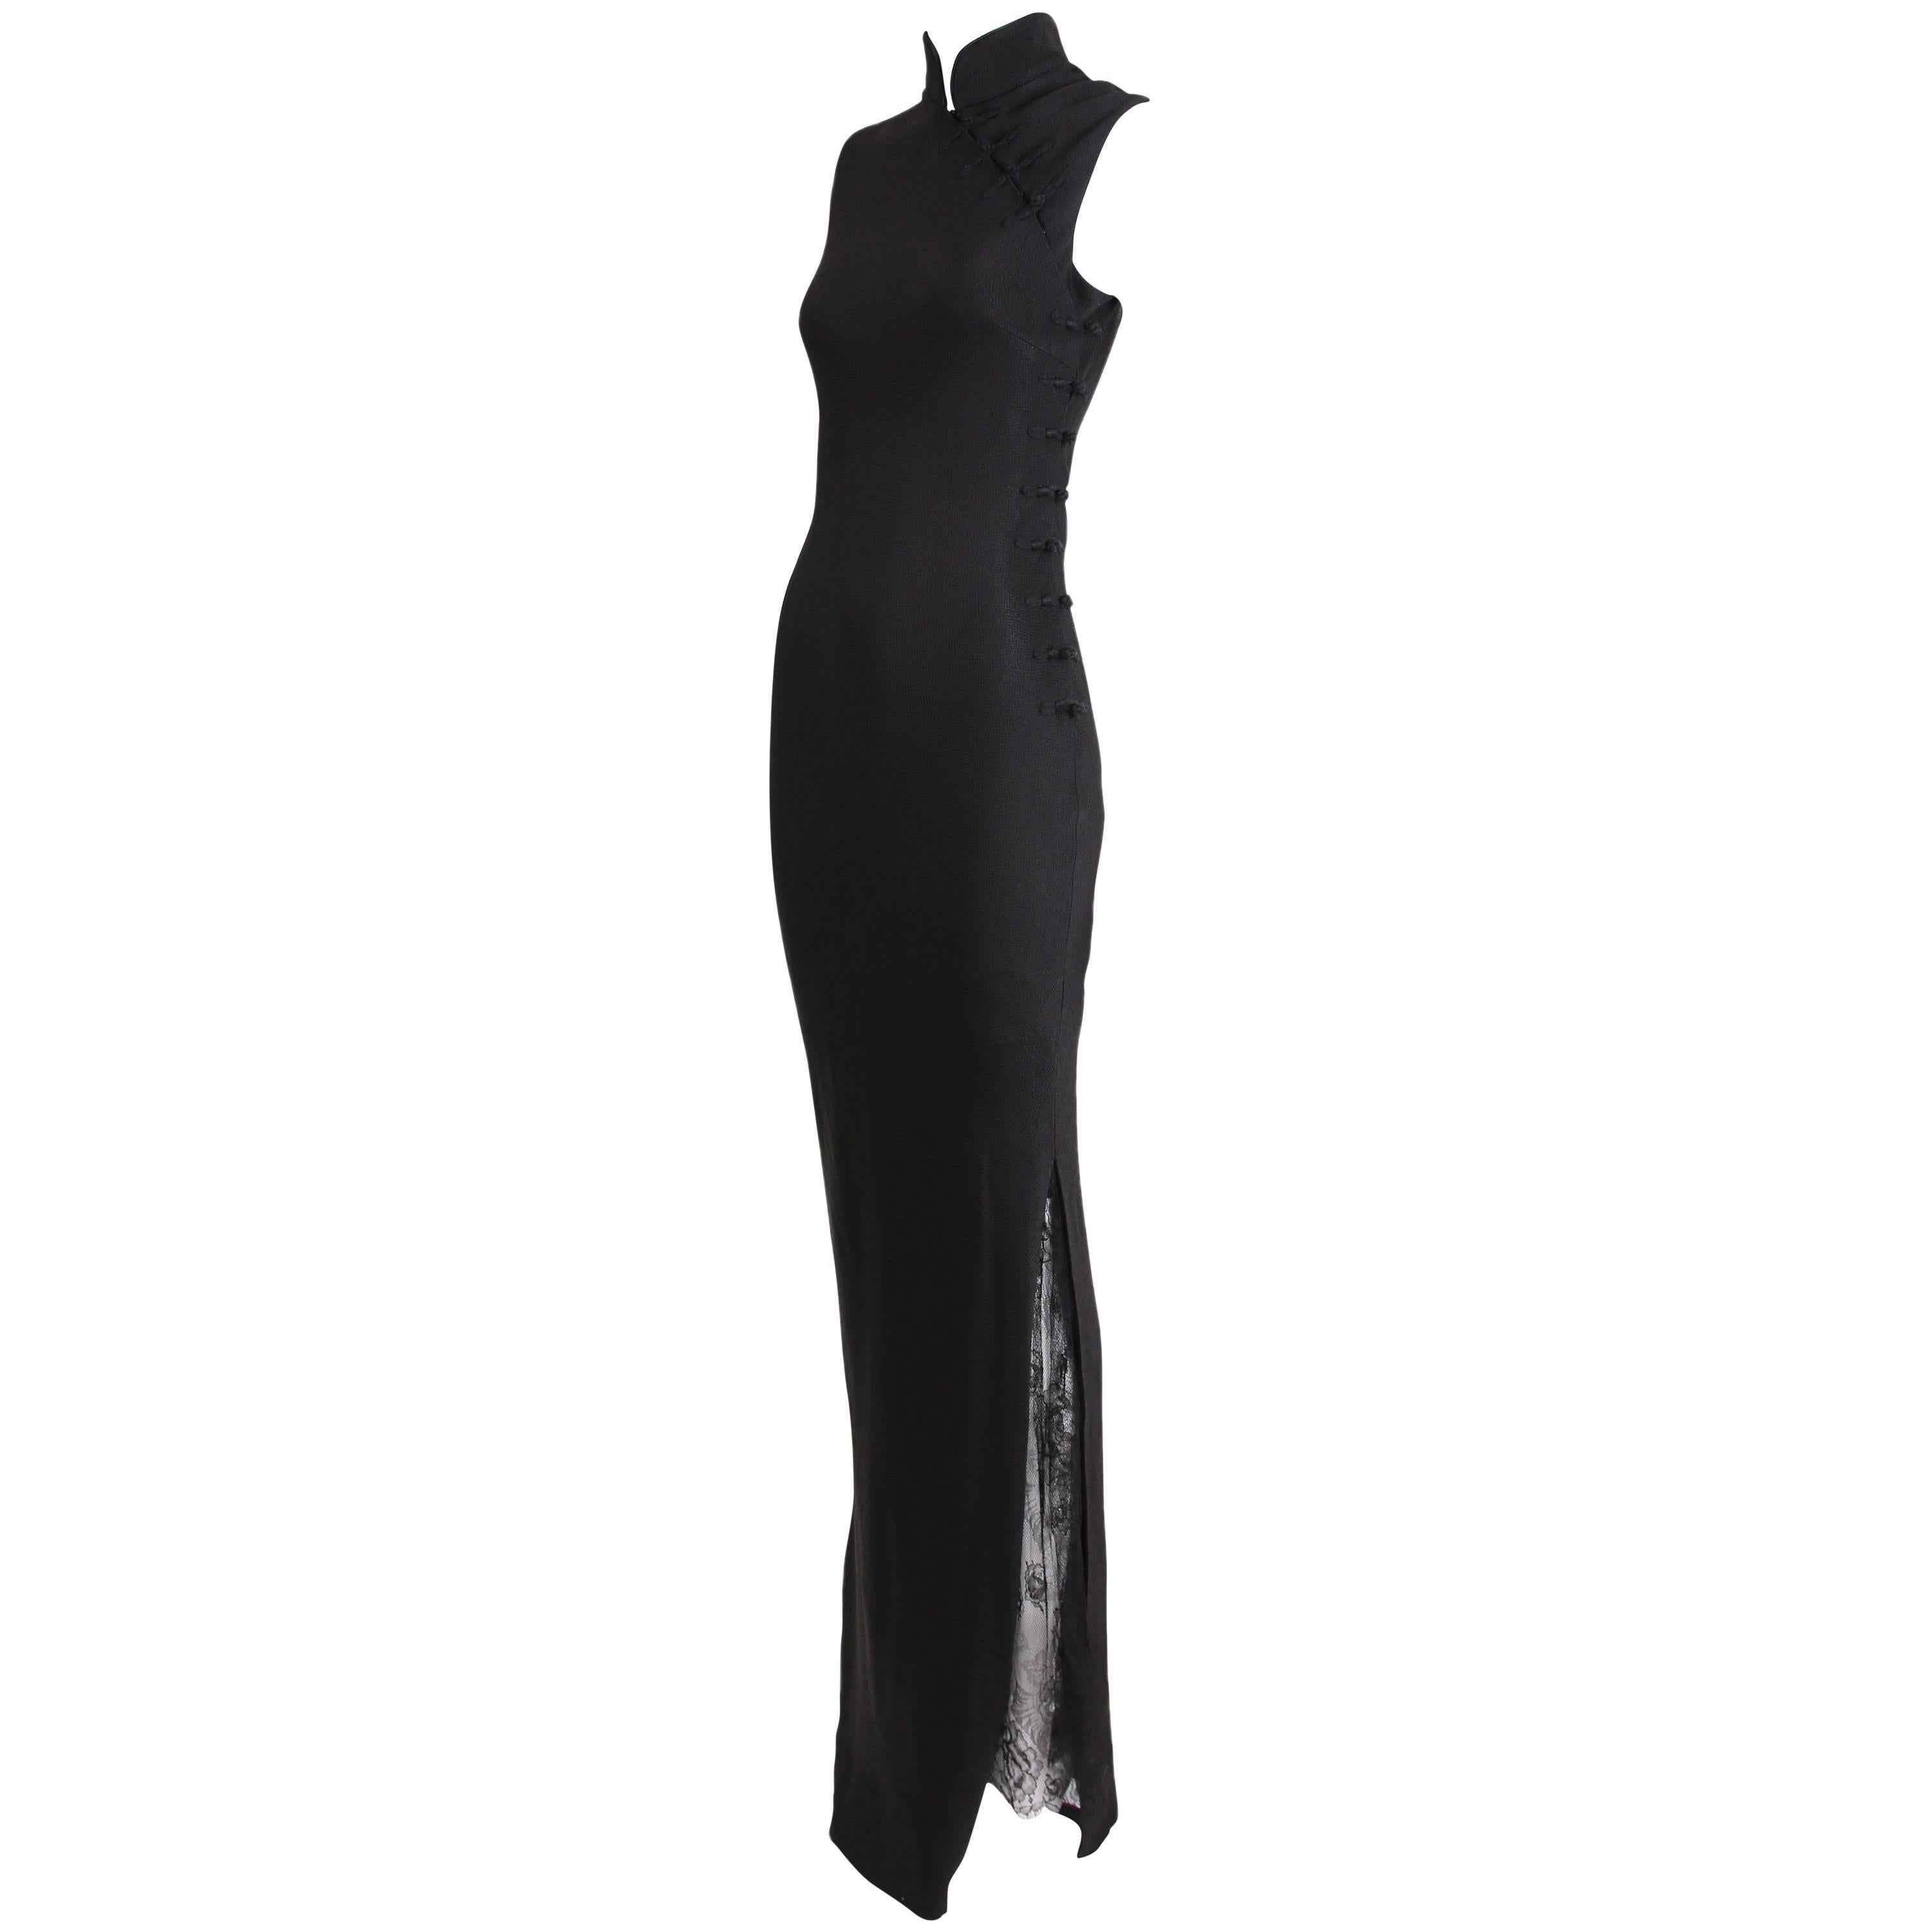 Christian Dior by Galliano Black Sleeveless Evening Gown w/Lace Inset Side Slit